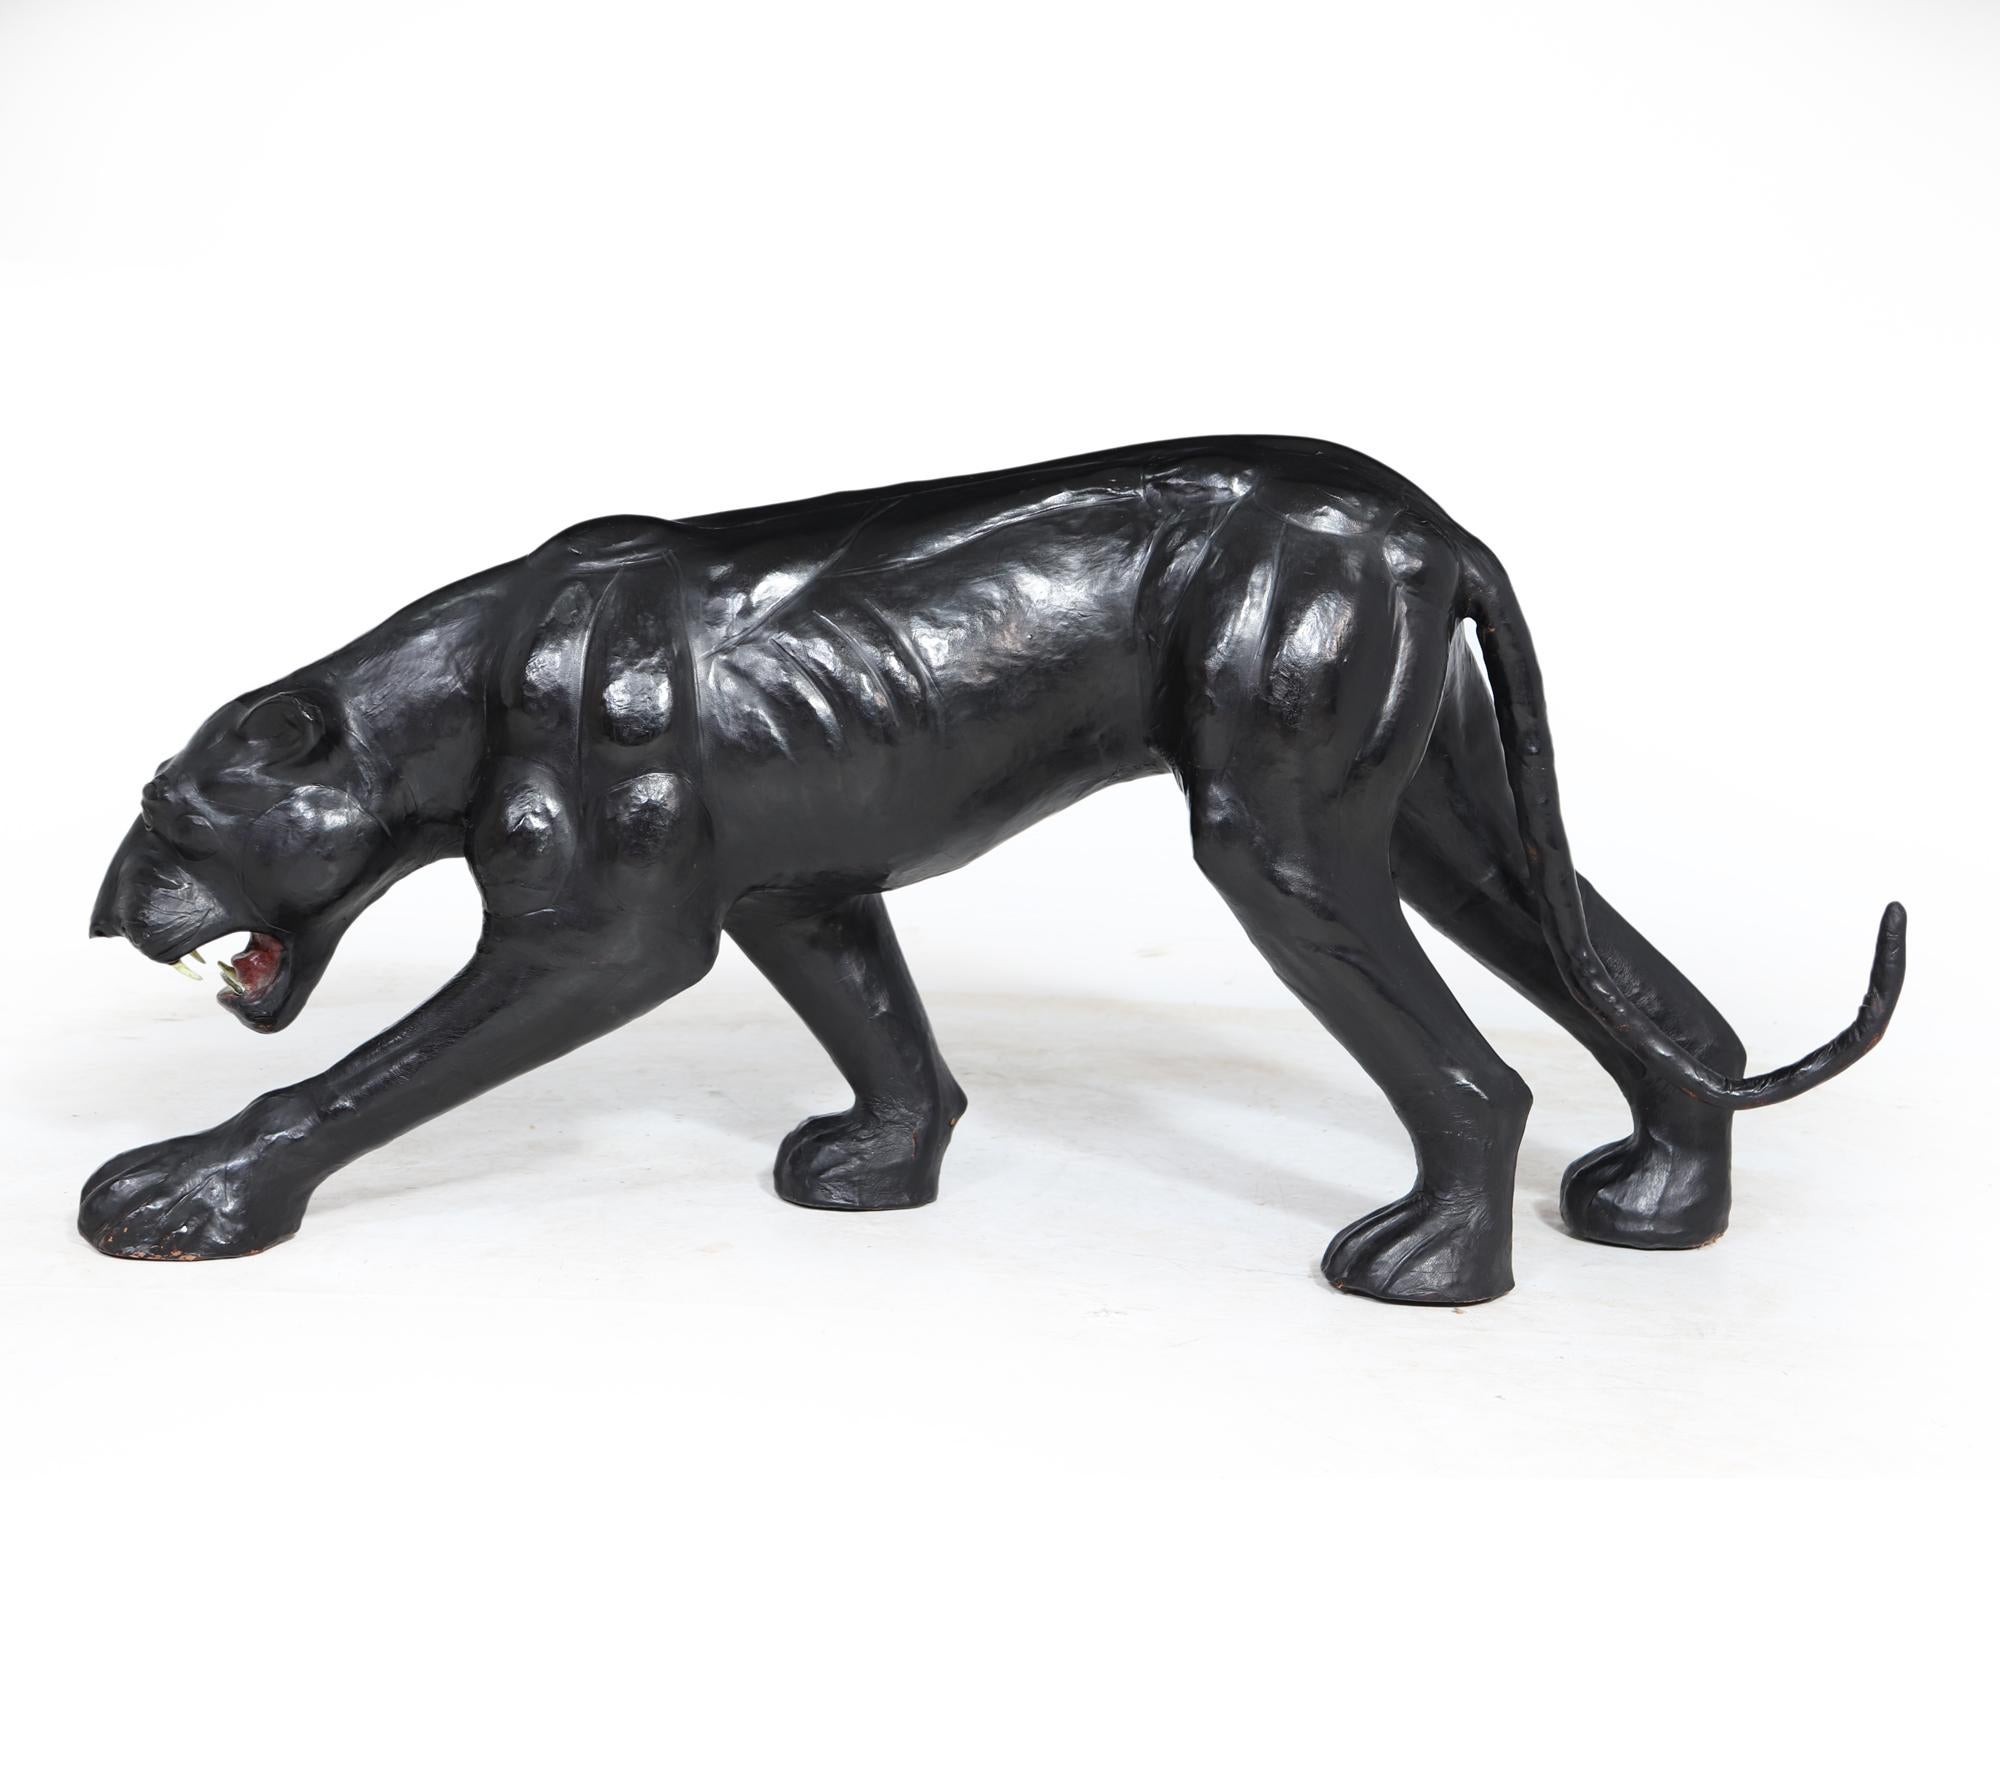 A very rare high quality and very well sculpted leather clad, wire and papier mache exceptional fave and definition, the panther has perfect proportion standing in a stalking pose. This was produced in the 1950 unsure of where and by whom but the